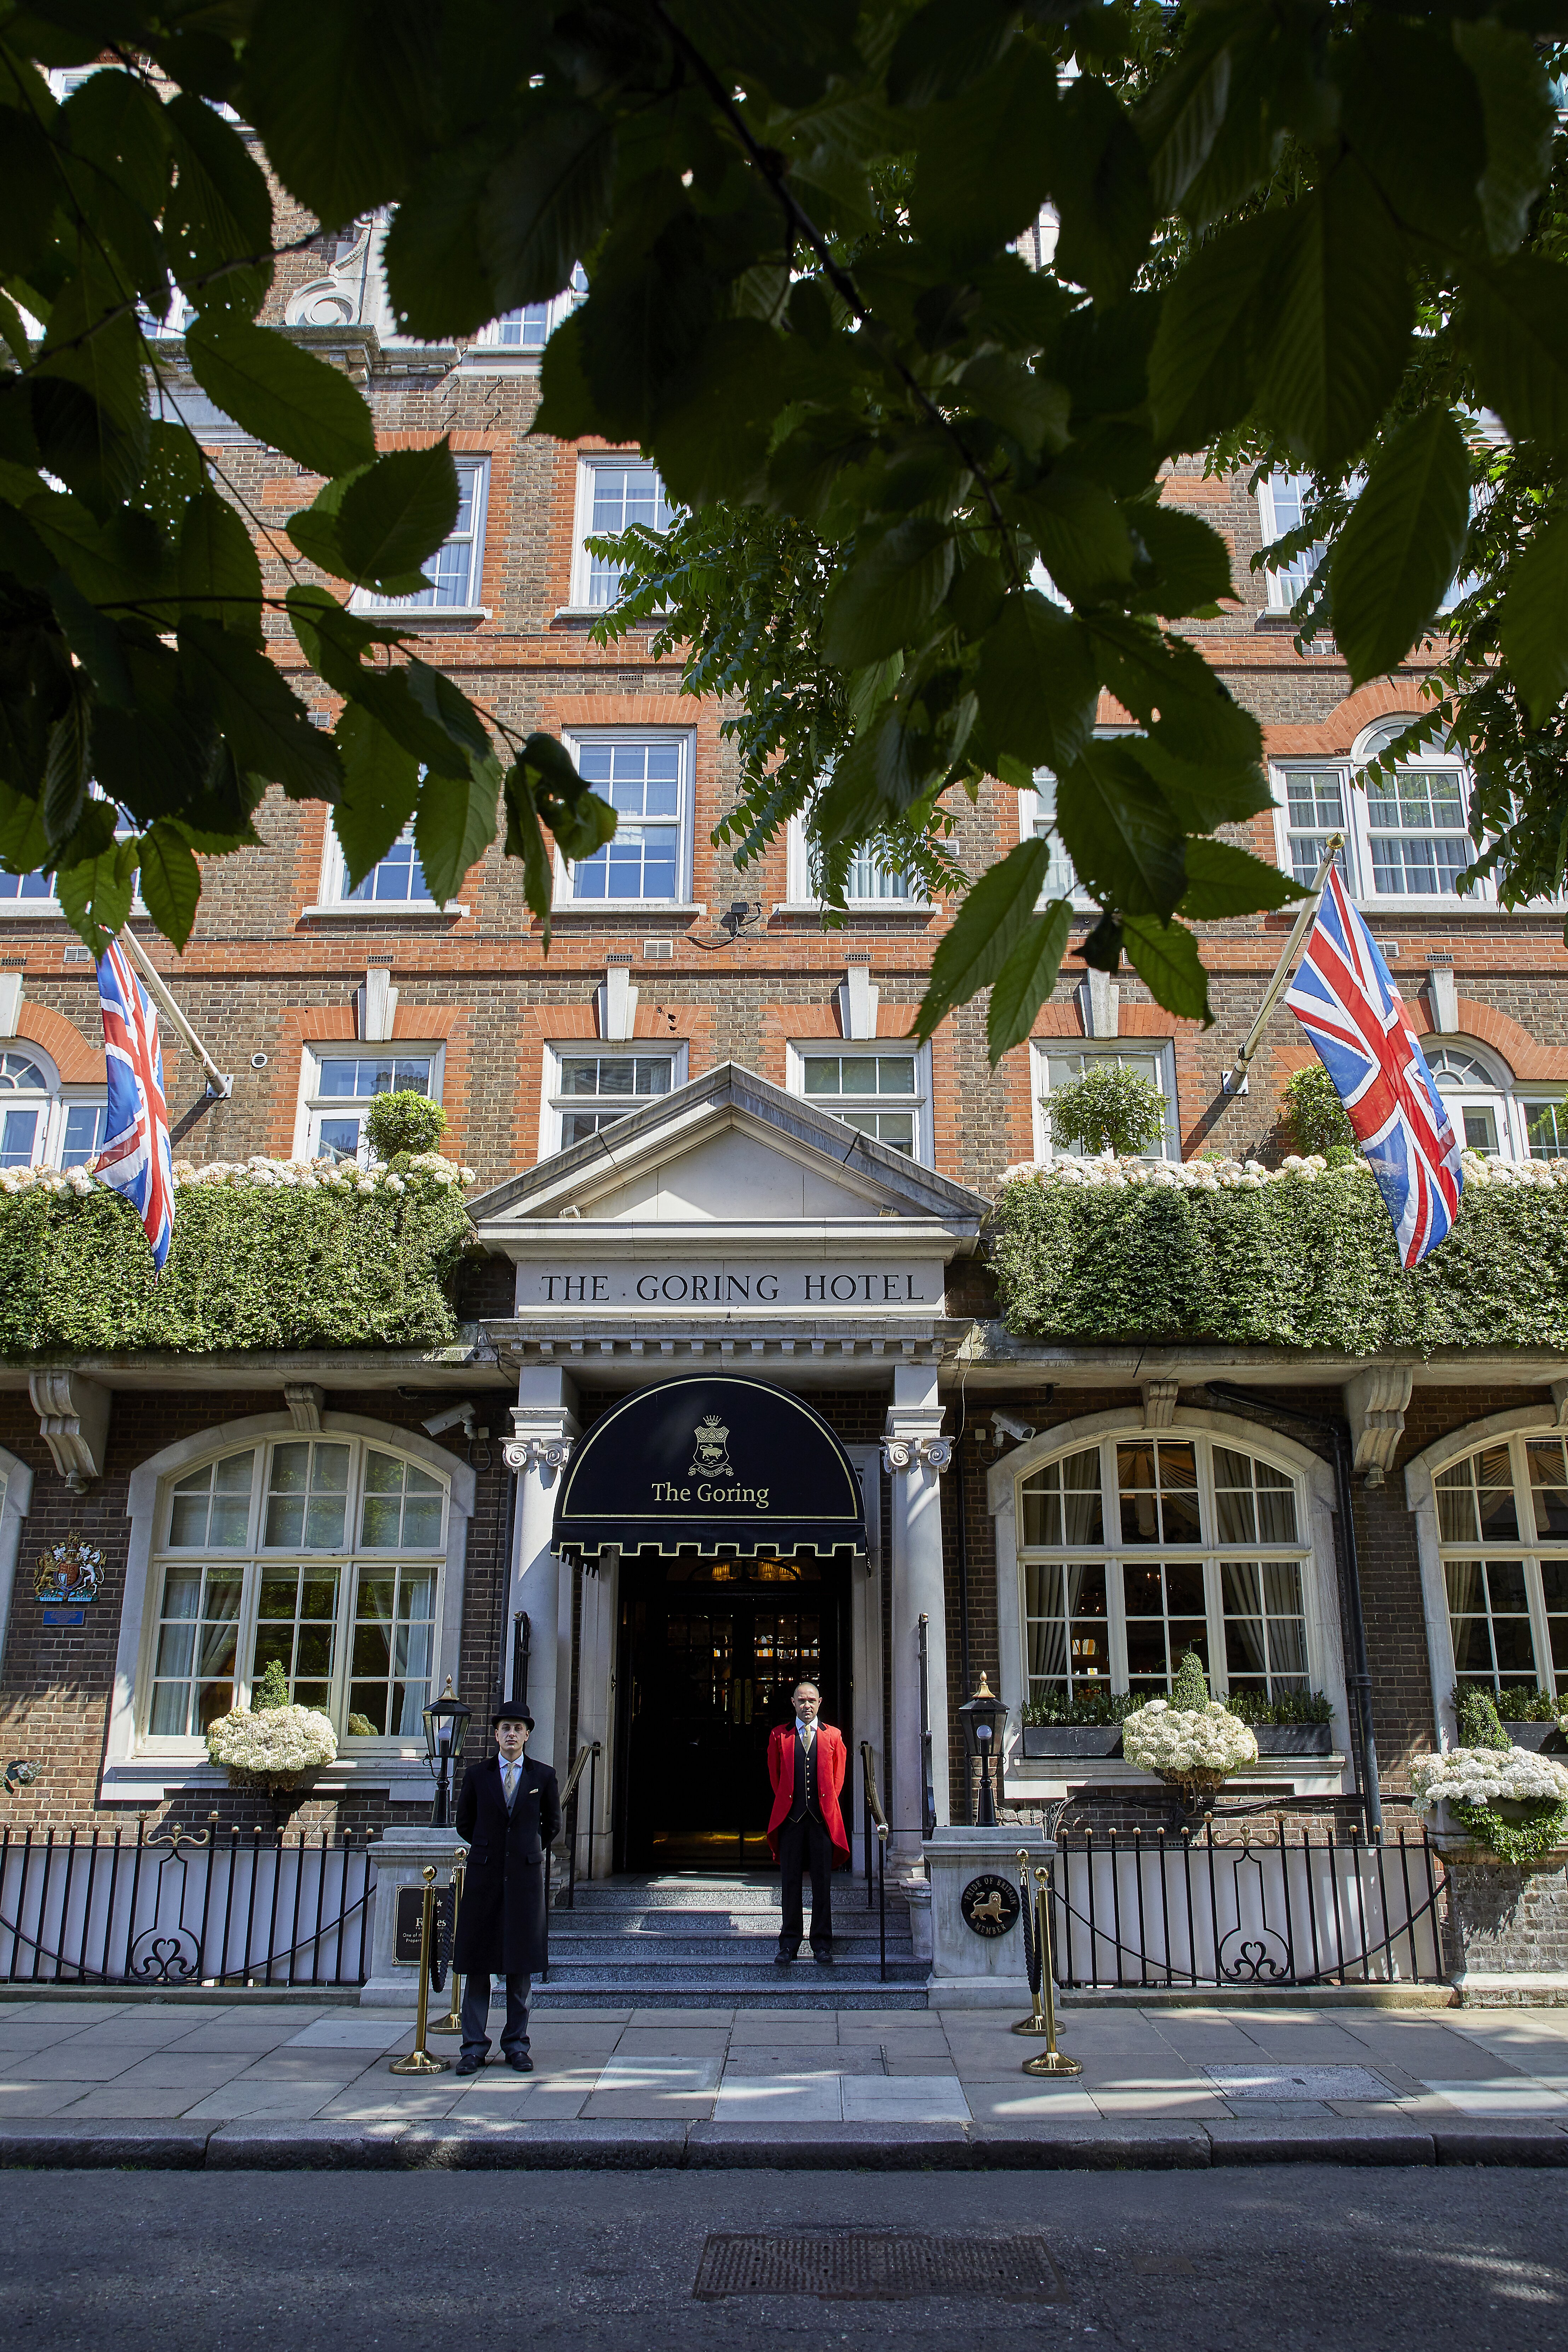 Michael Voigt appointed general manager at the Goring hotel